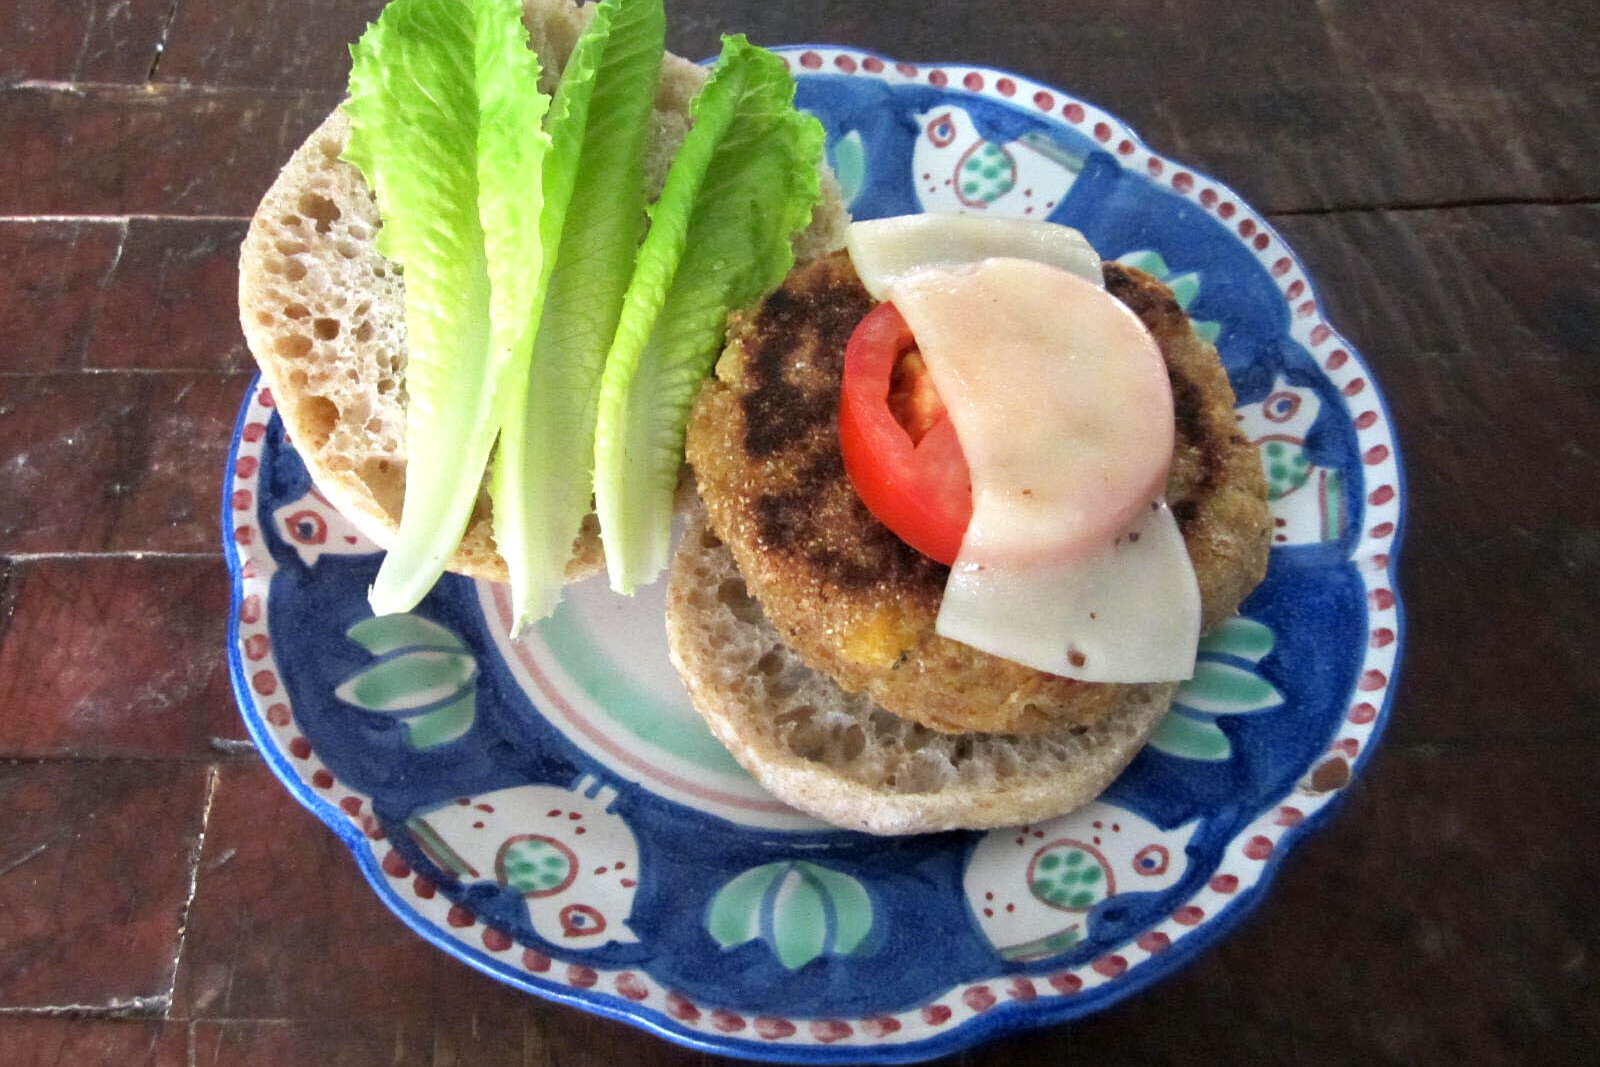 garbanzo wheat burgers with lettuce, tomato, and cheese